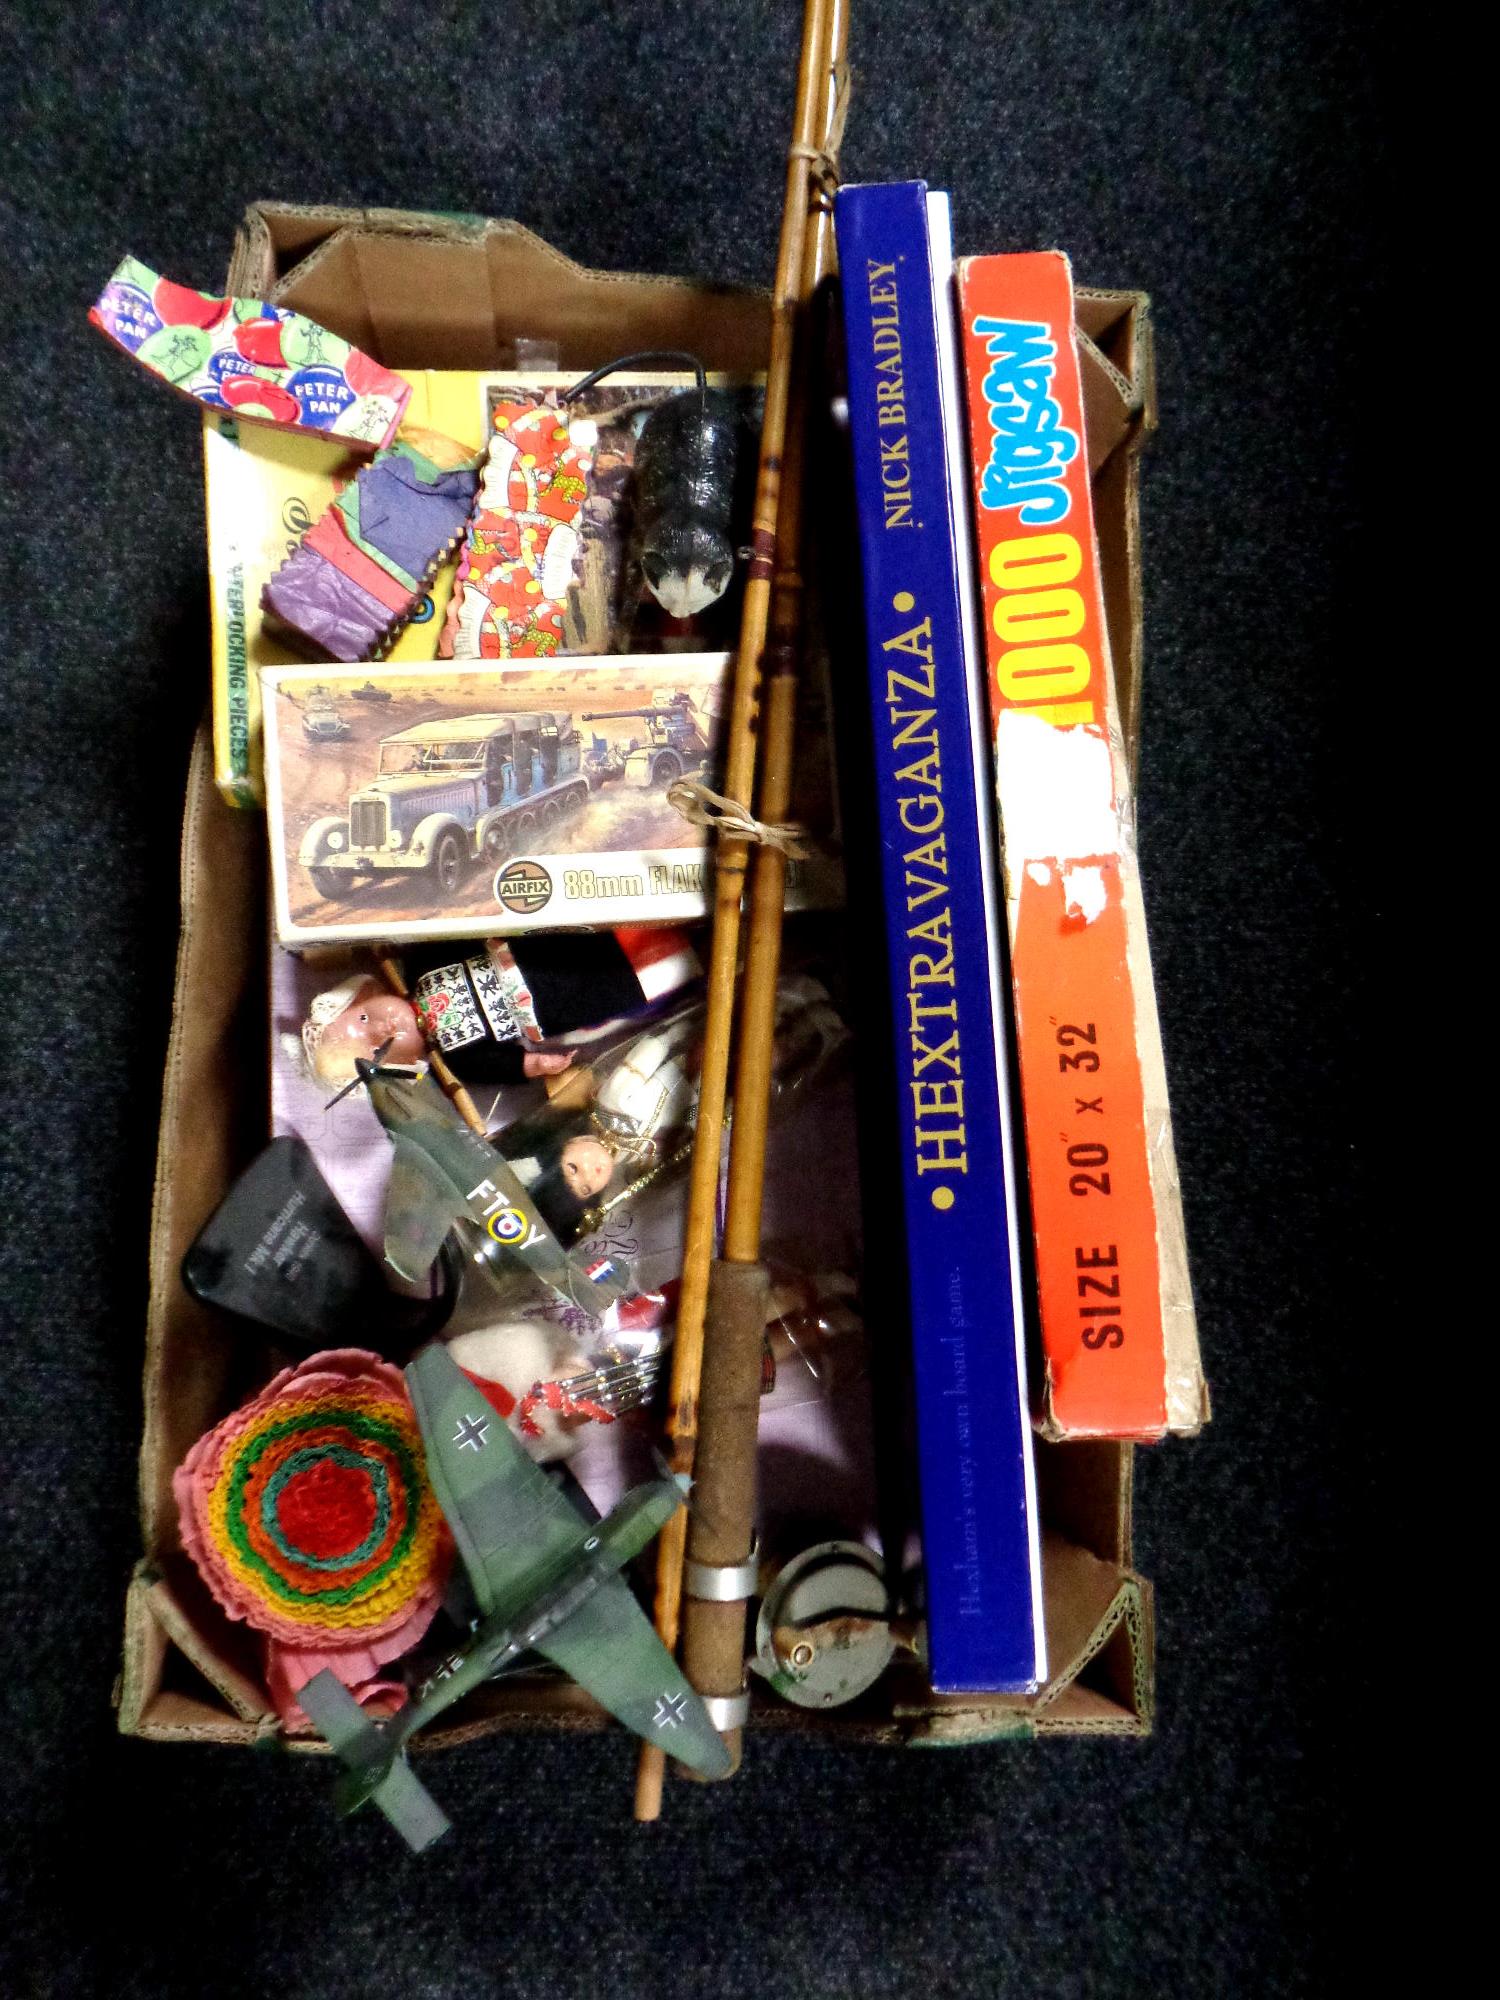 A box containing boxed doll, Airfix model kit, a three piece split cane fly rod with reel,